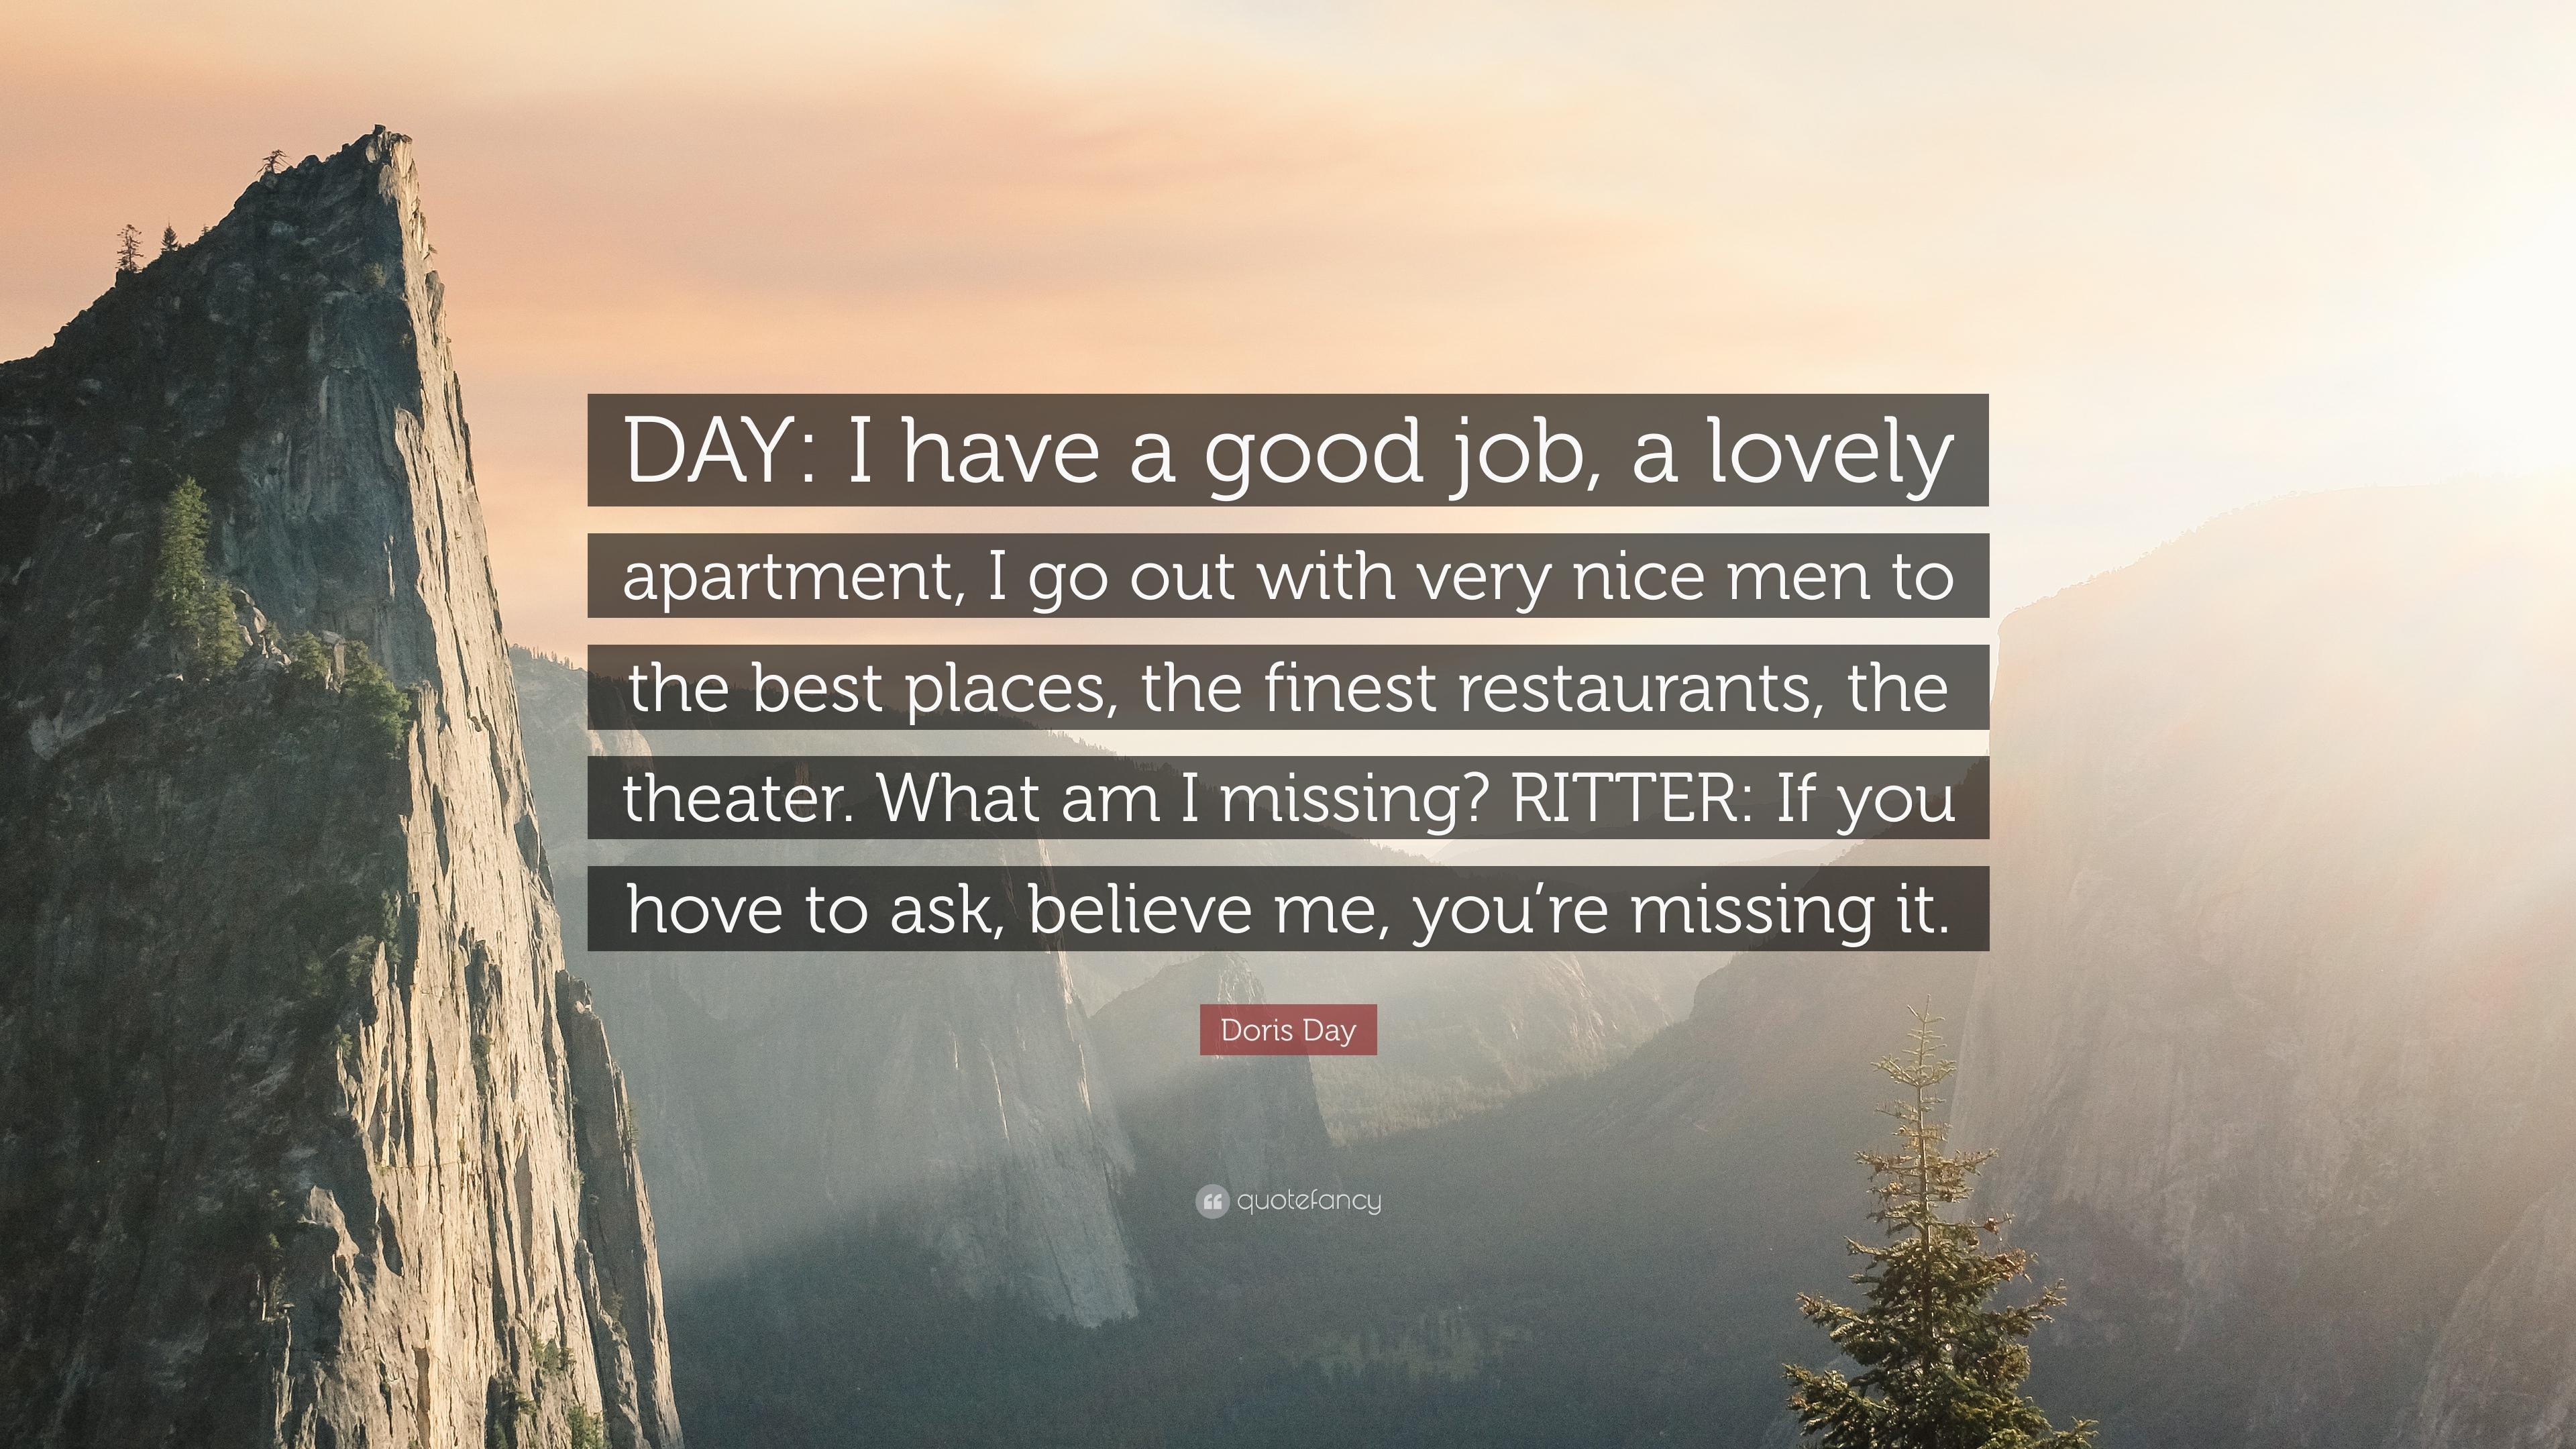 Doris Day Quote: “DAY: I have a good job, a lovely apartment, I go